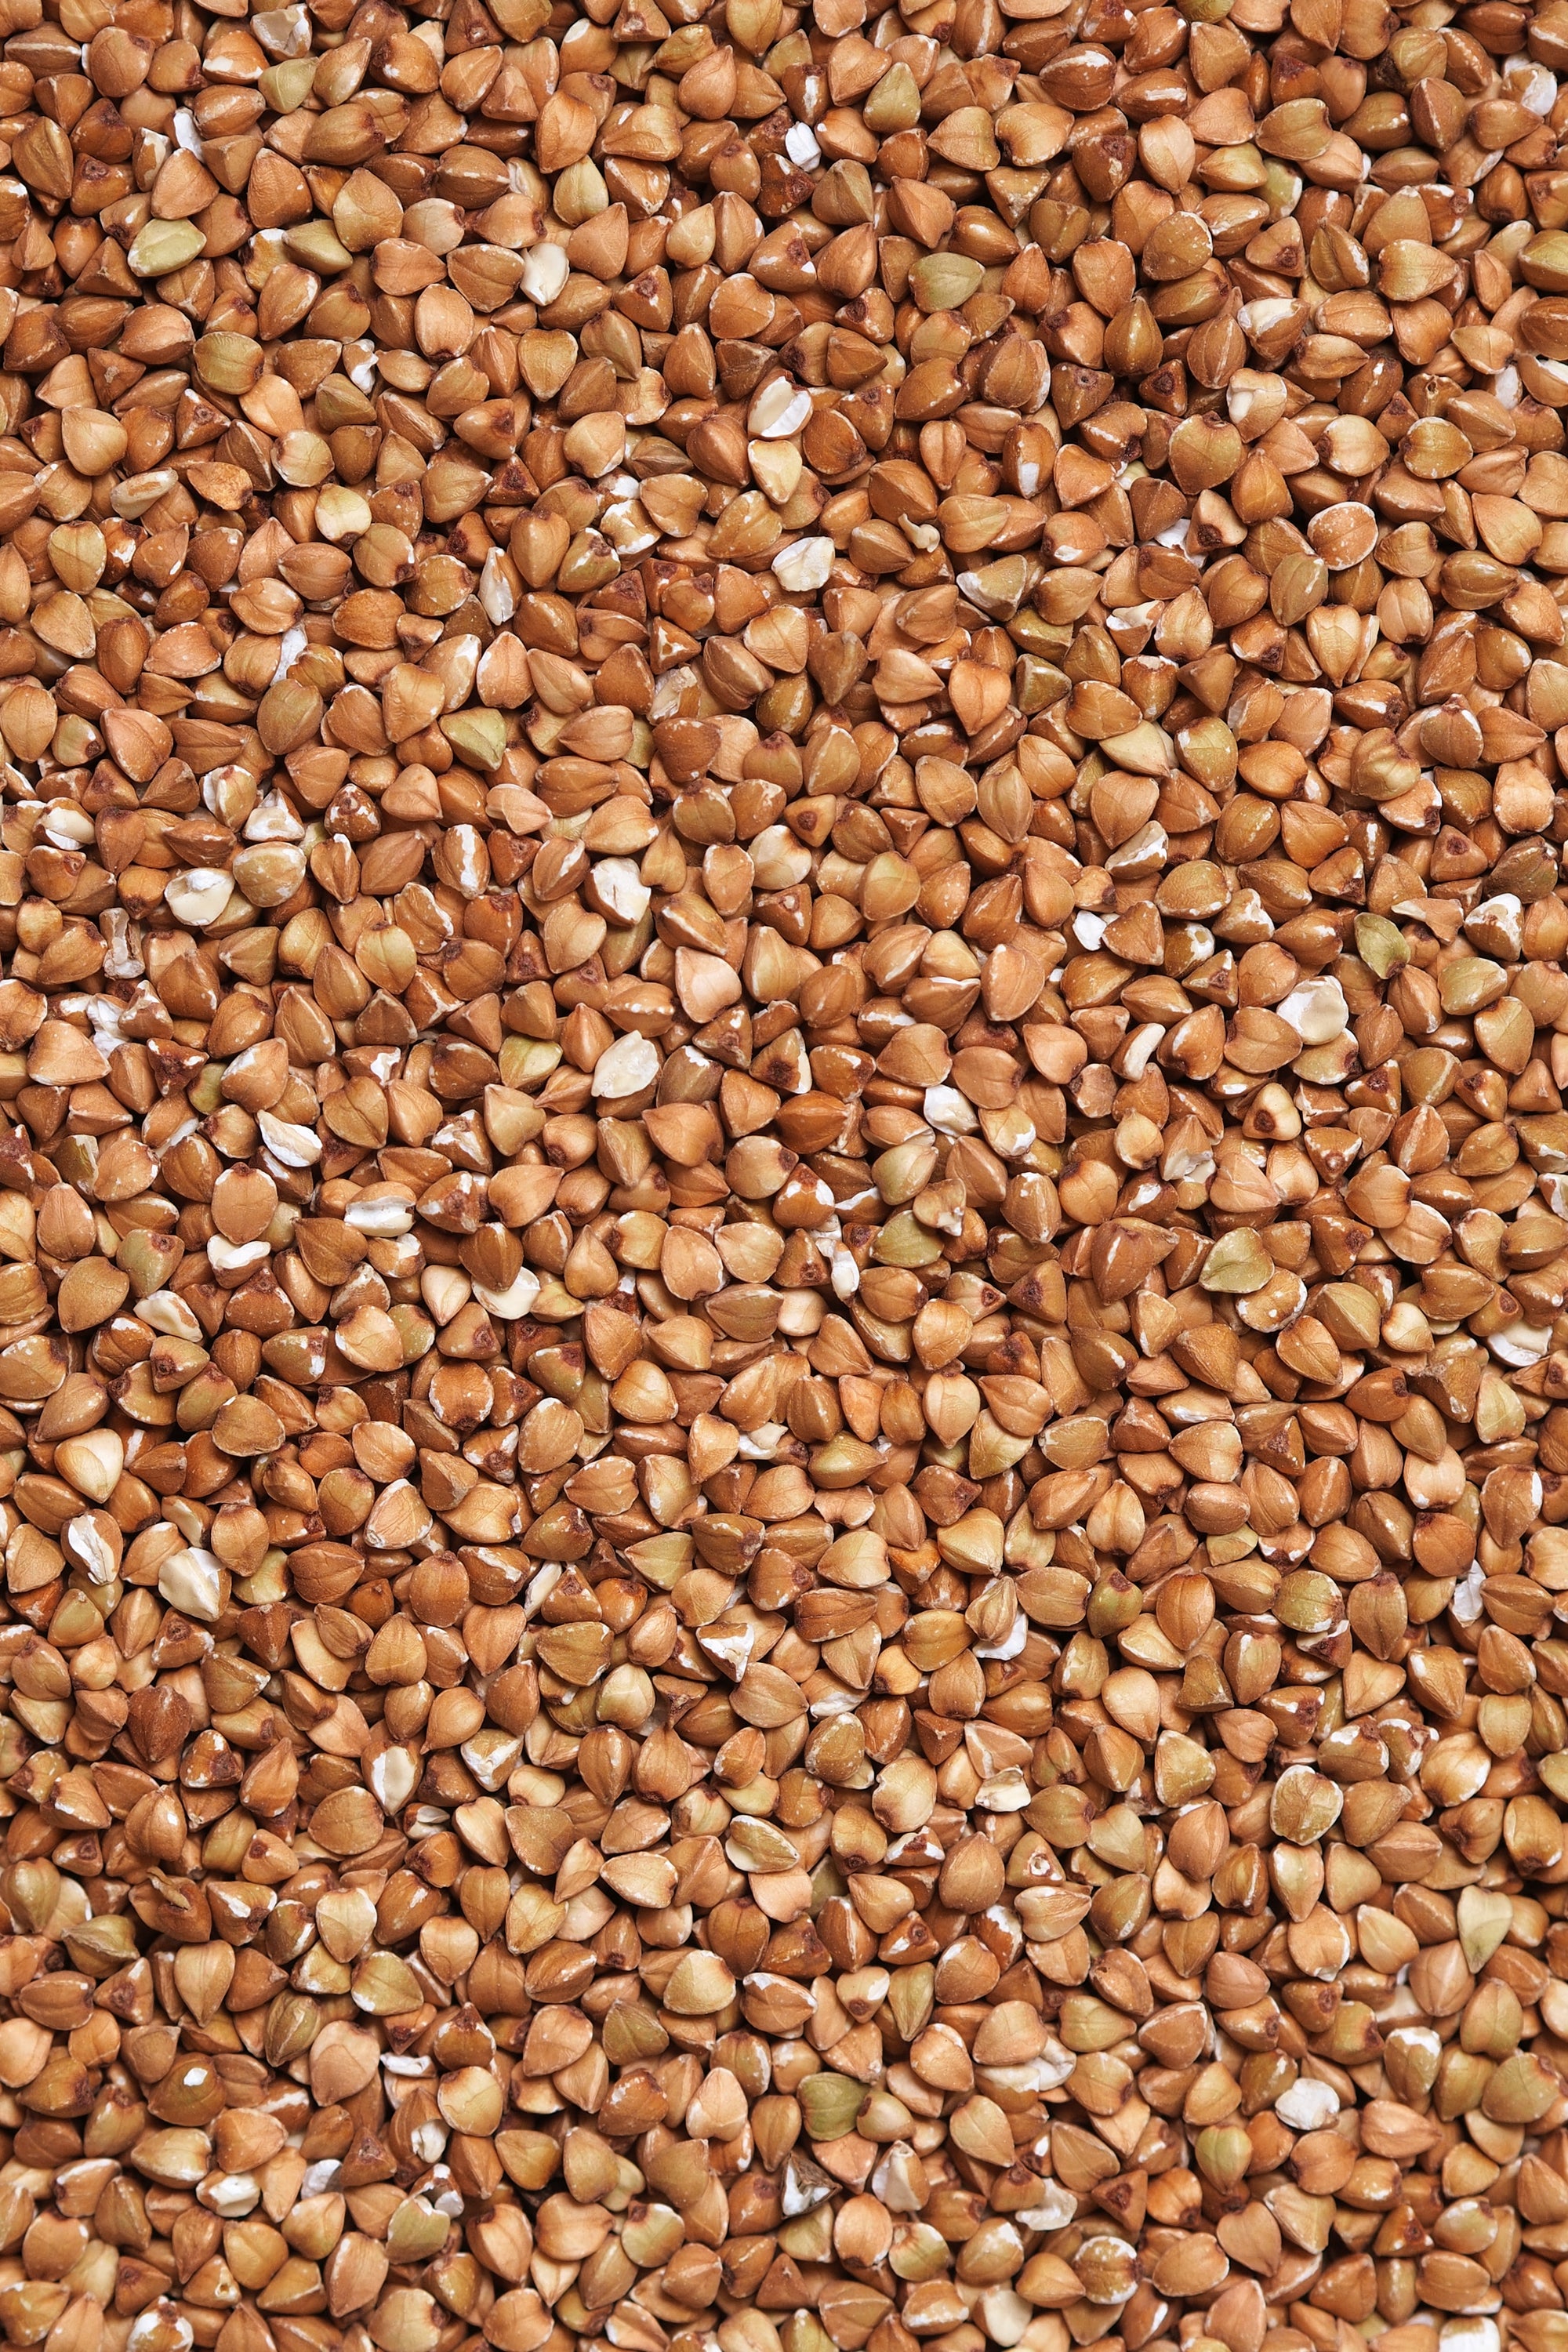 Buckwheat: The Superfood You Need to Add to Your Diet